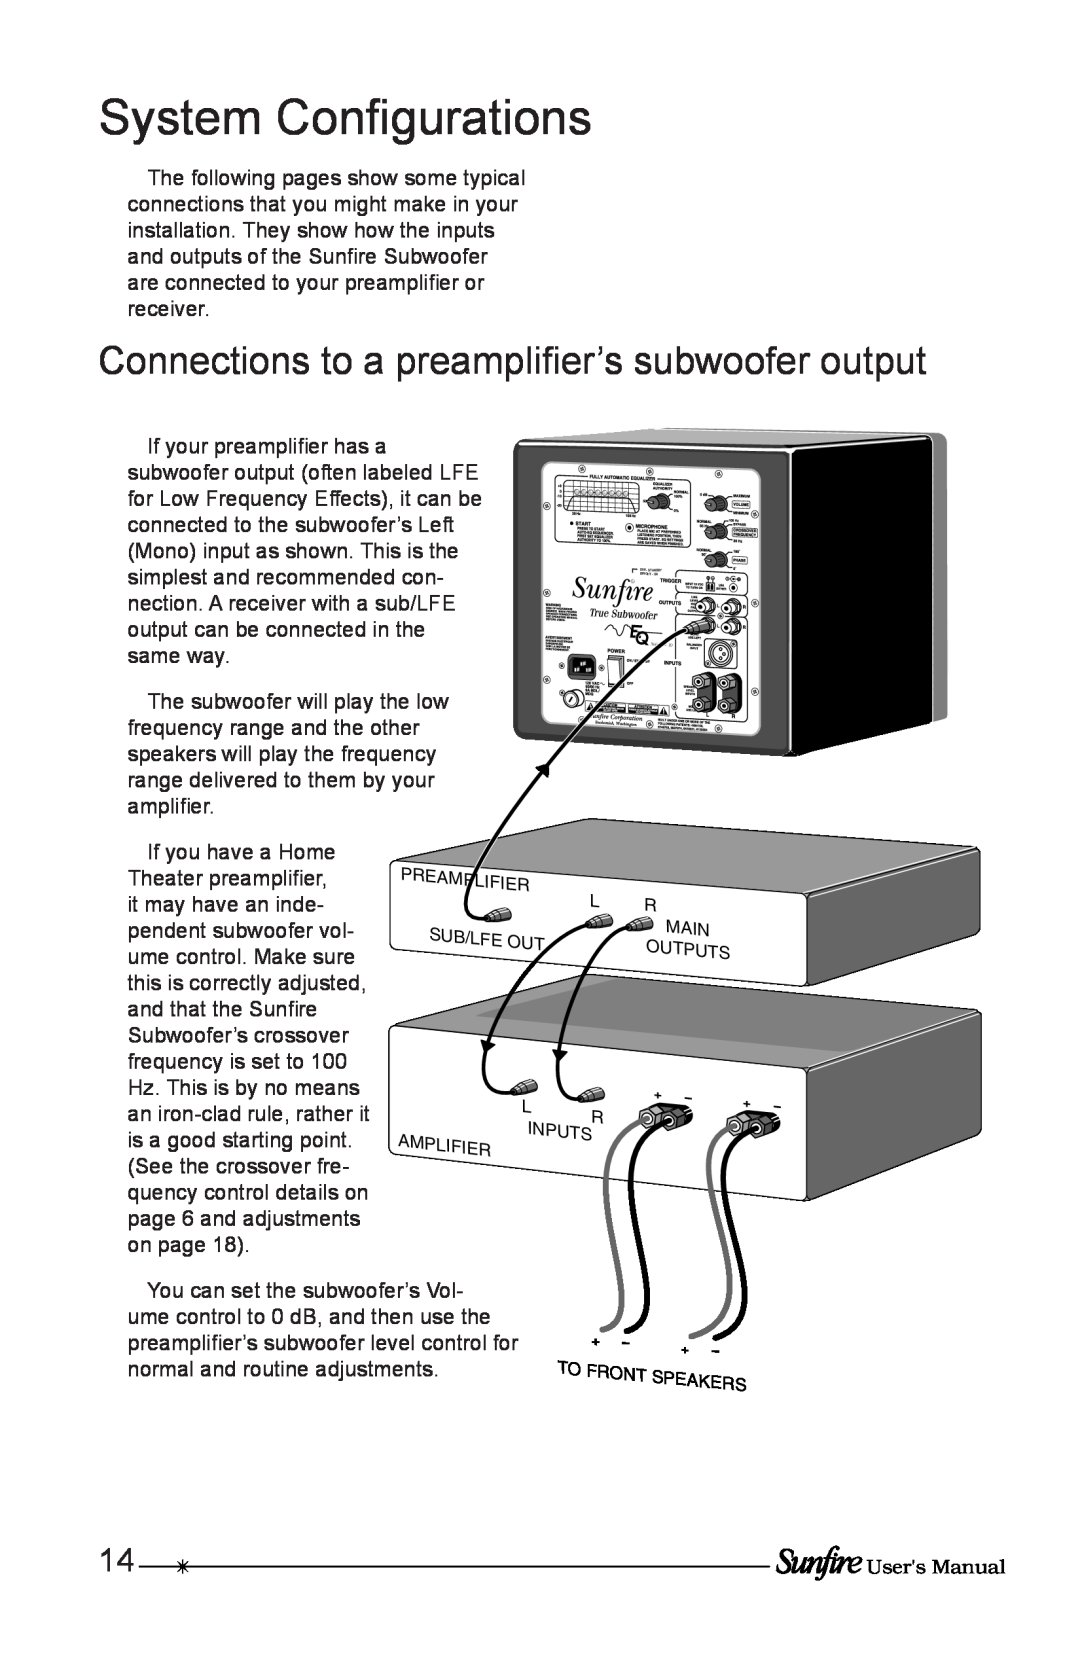 Sunfire Solitaire 10 user manual System Conﬁgurations, Connections to a preampliﬁer’s subwoofer output 